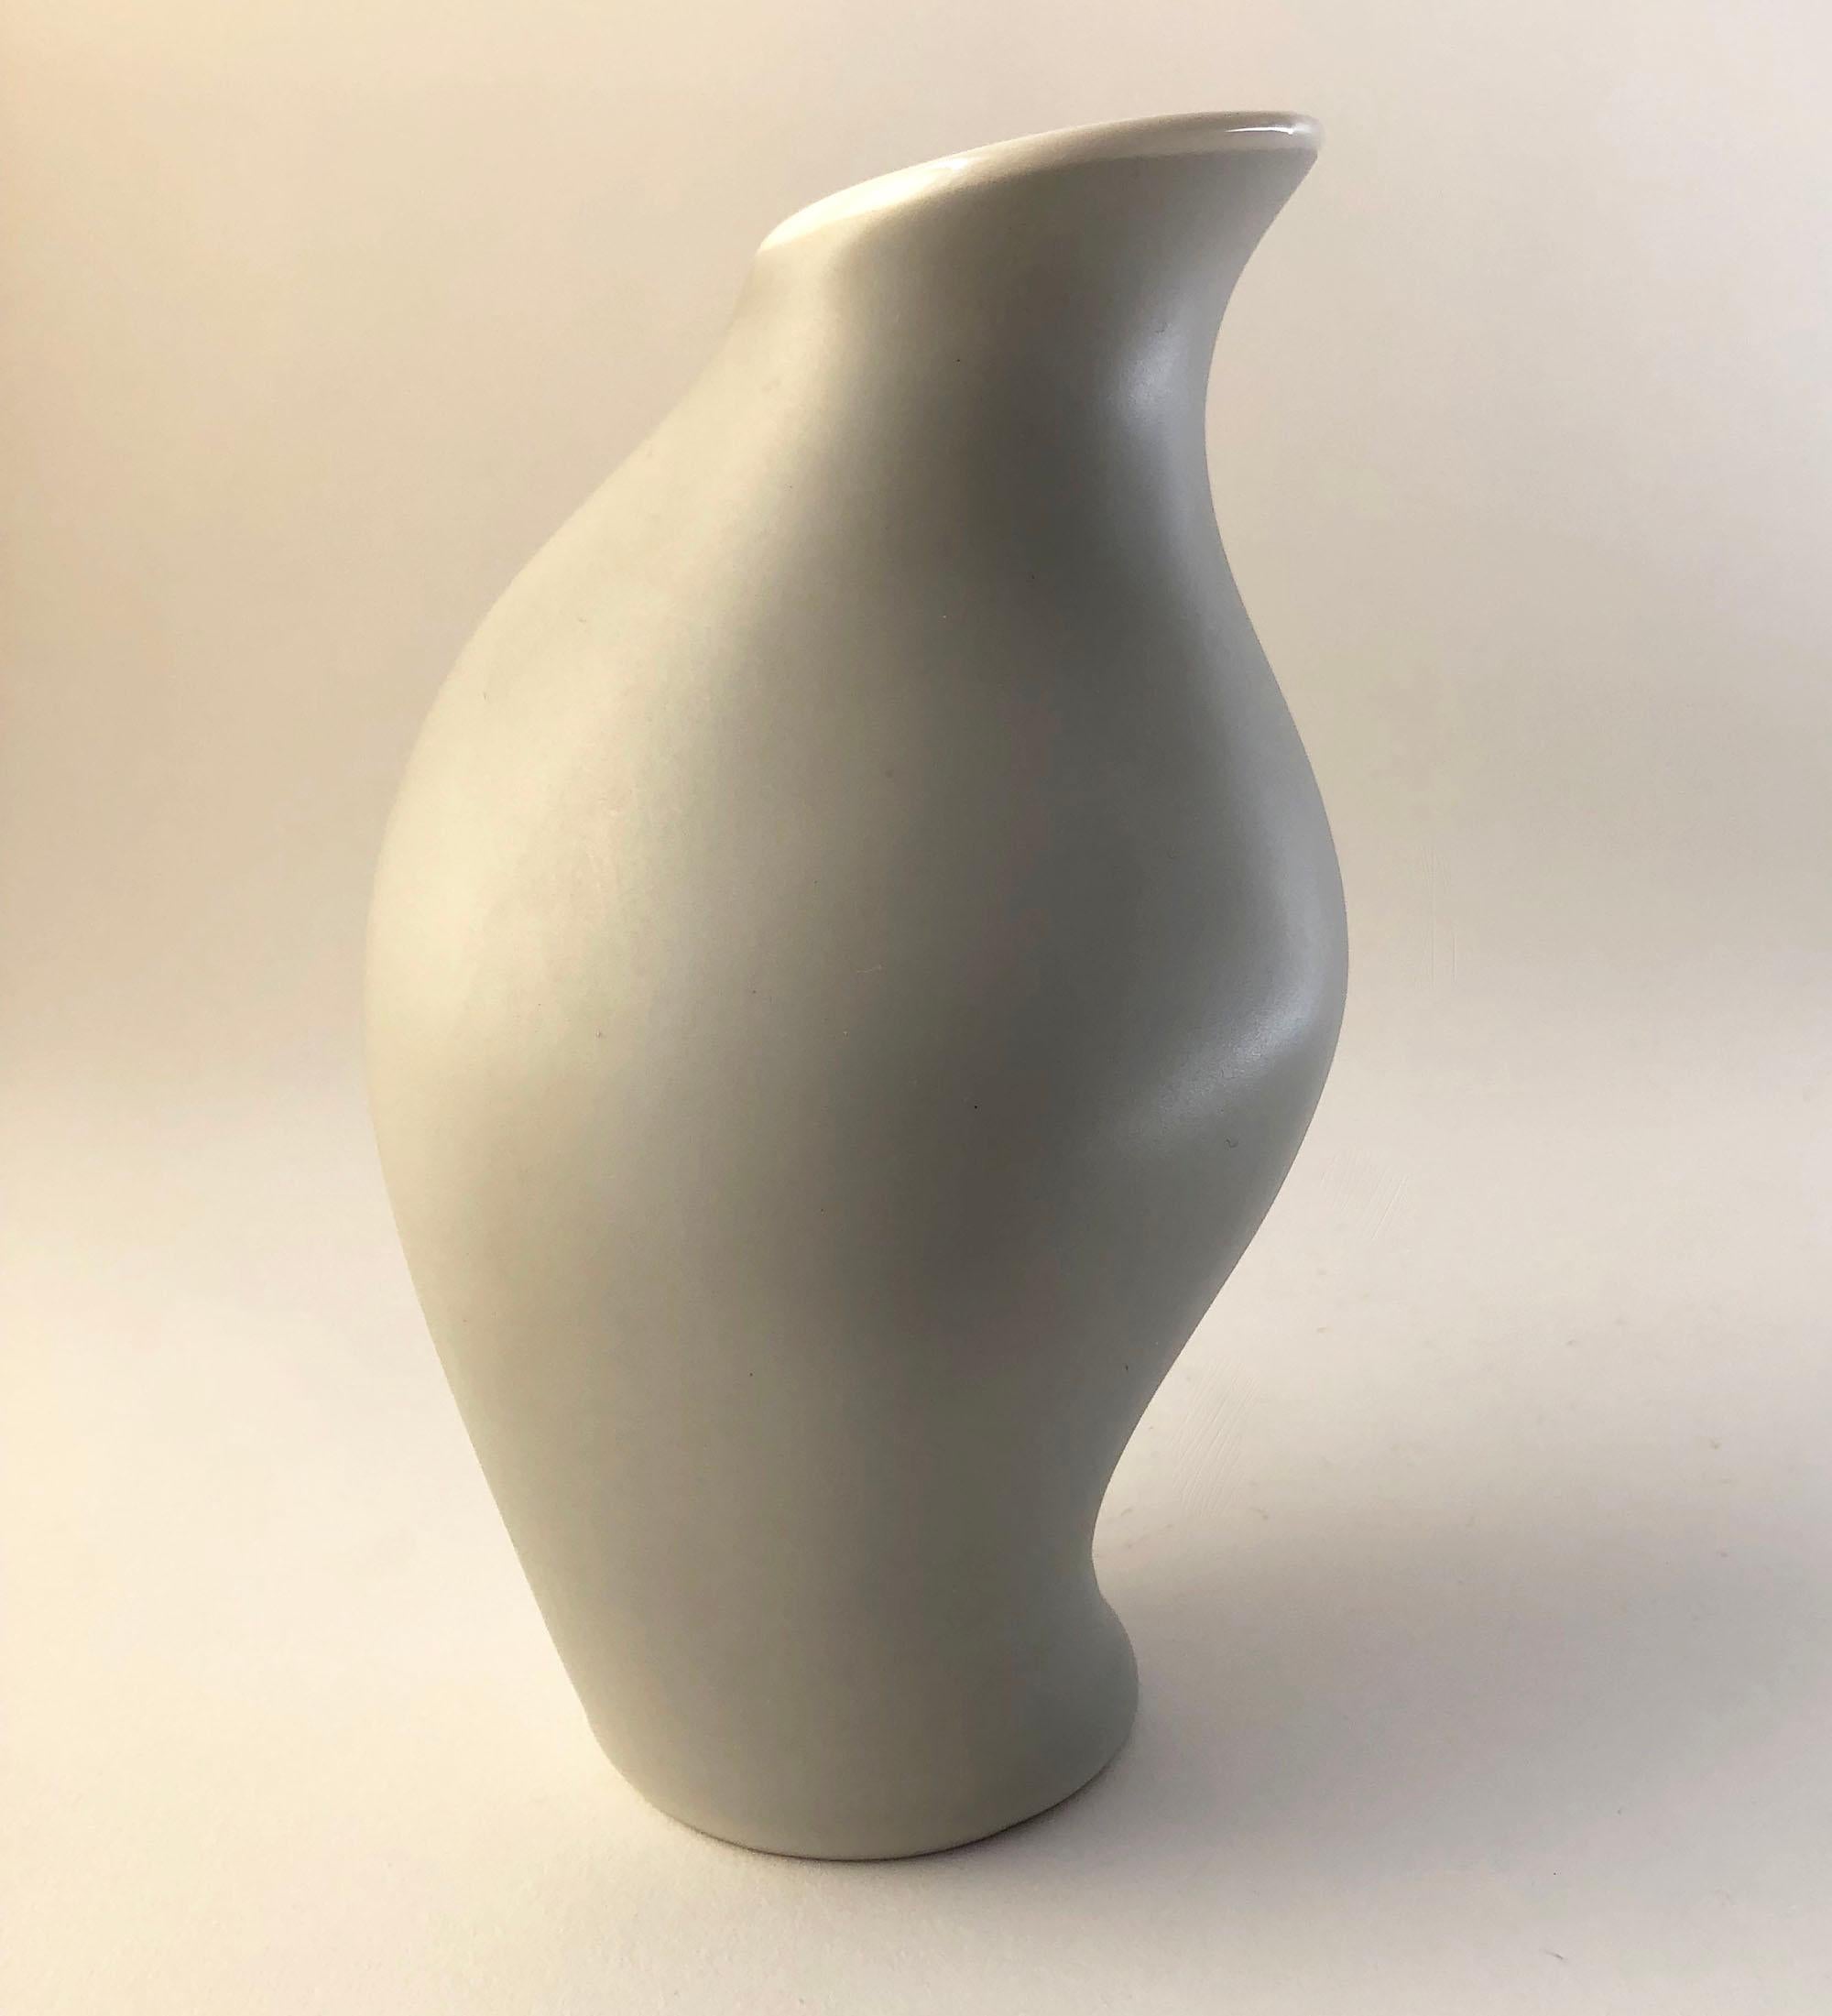 A rare, sensual grey porcelain vase created by Lindner, Bavaria Germany. Piece measures 6